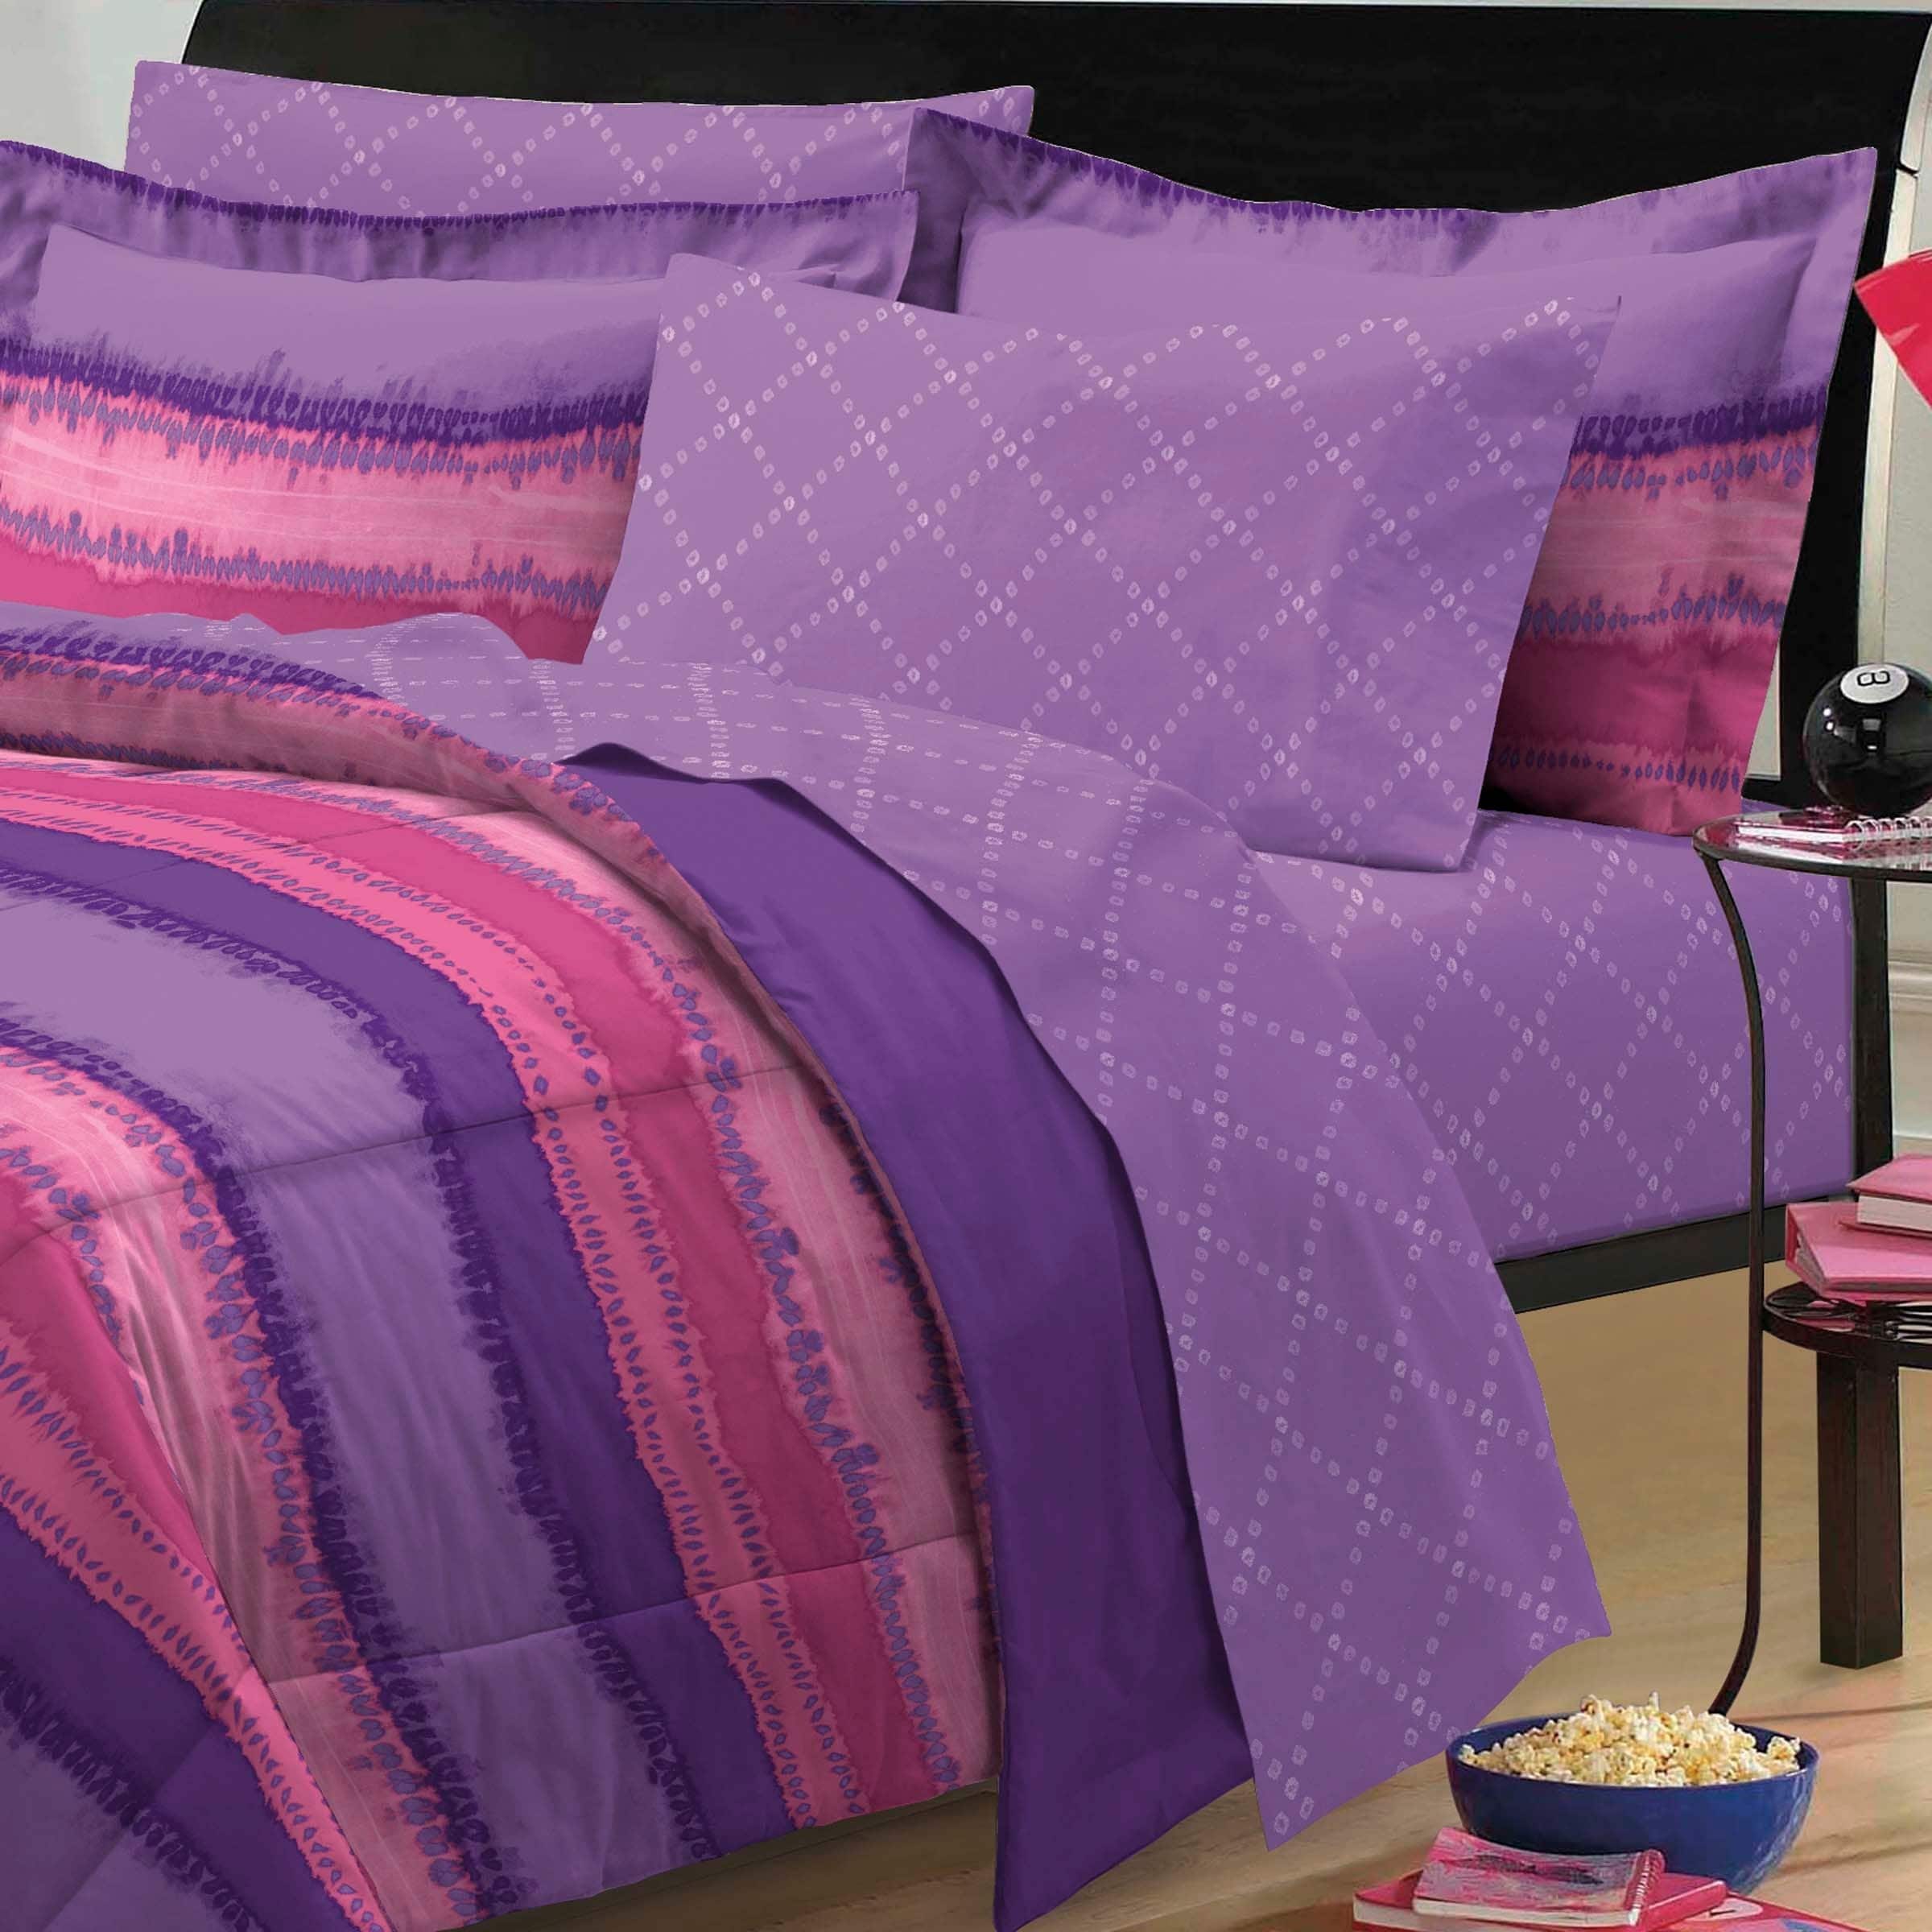 My Room Tie Dye Twin 5 Piece Bed in a Bag Bedding Set, Polyester, Plum - image 3 of 3